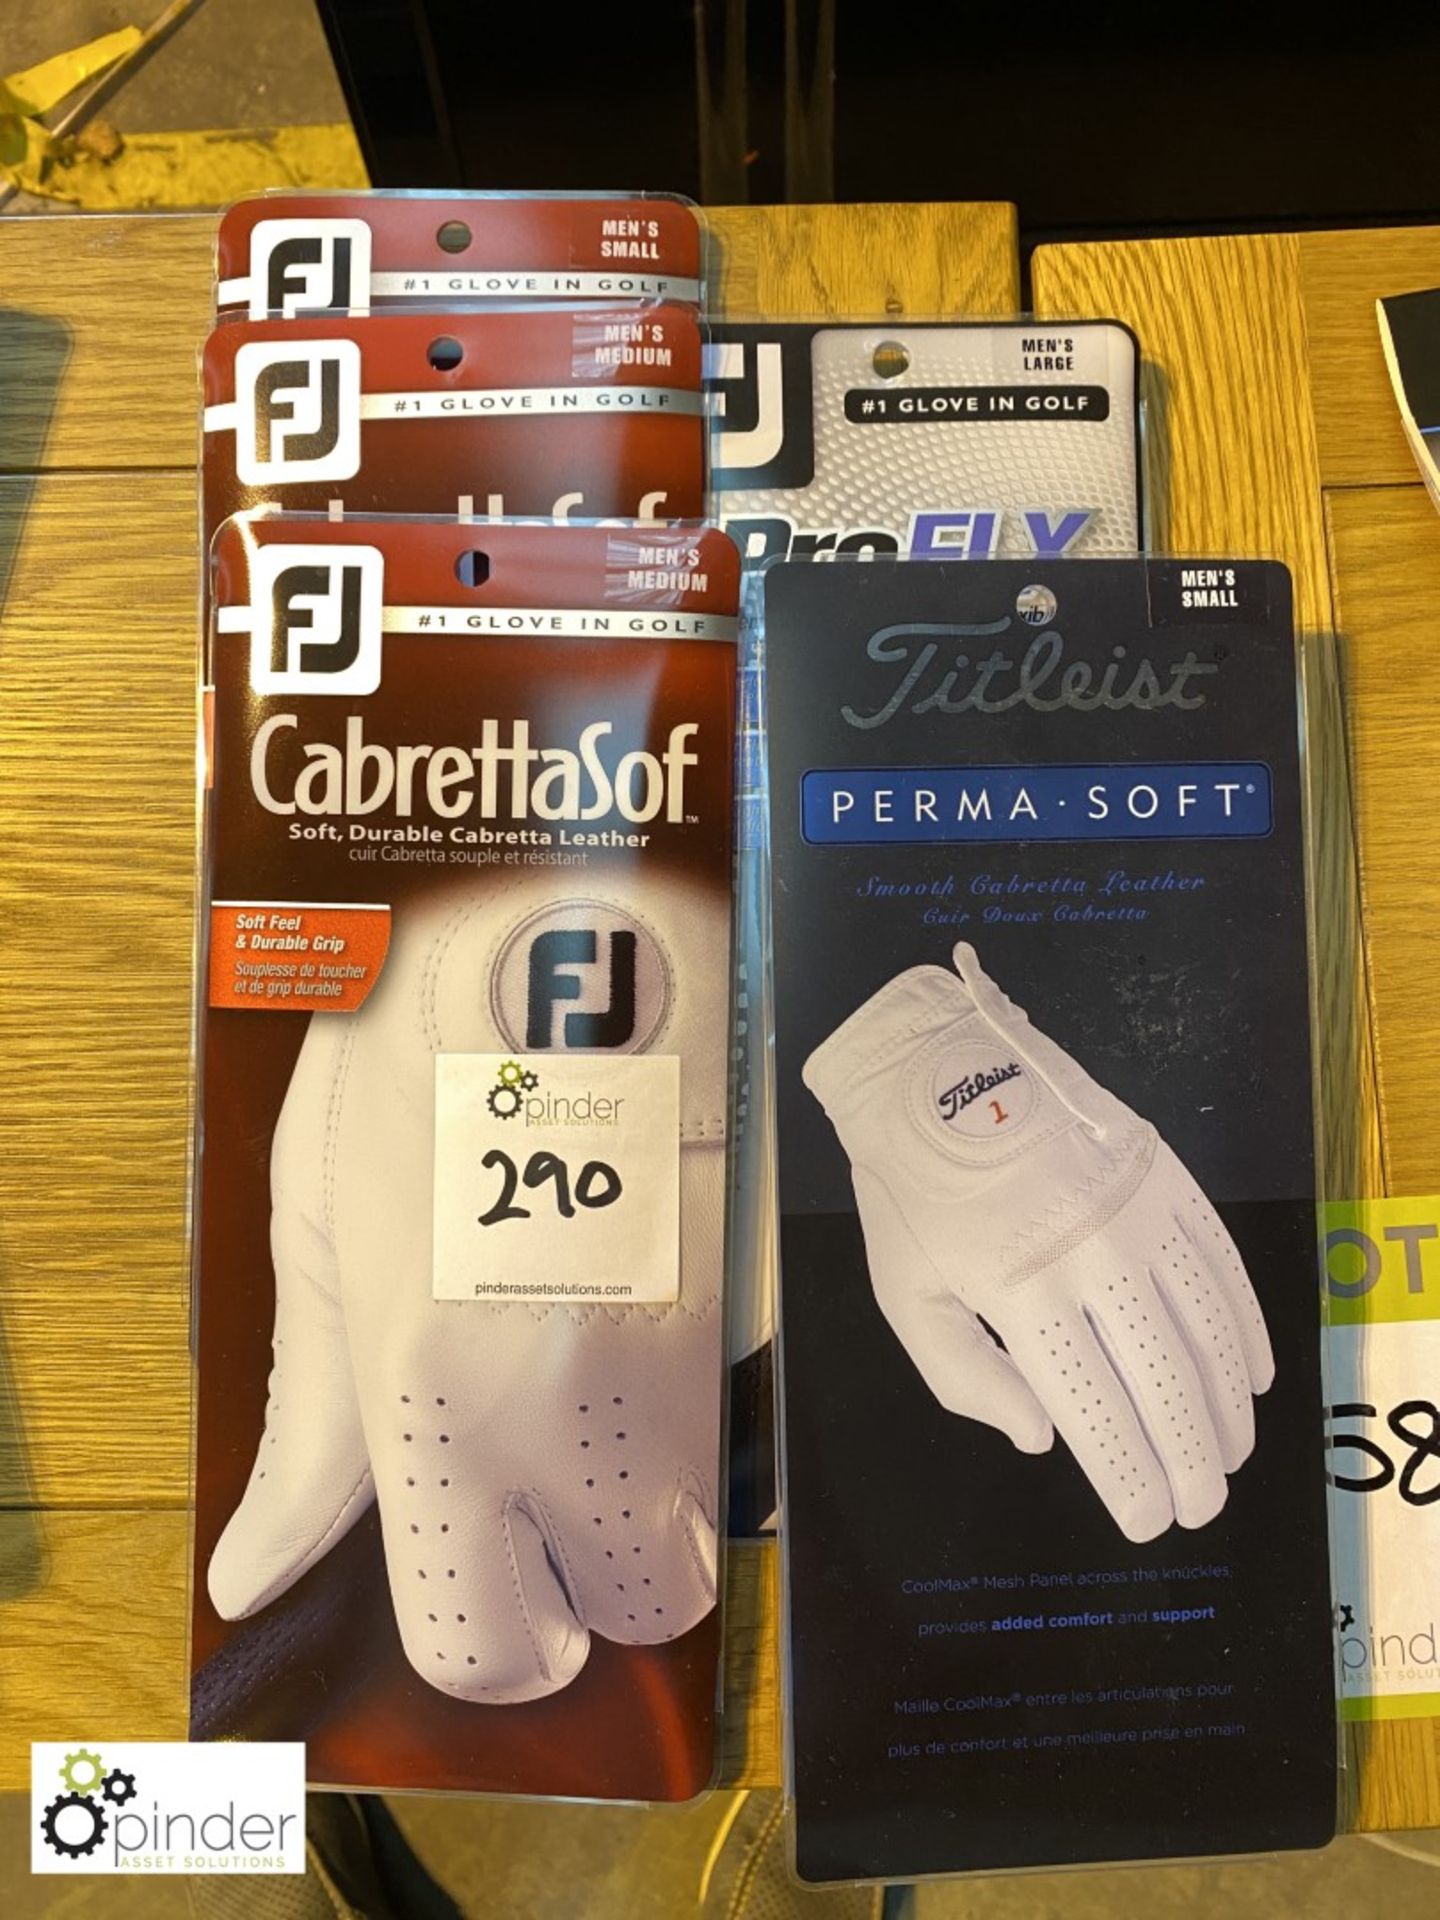 5 men's Golf Gloves, by FJ and Titleist